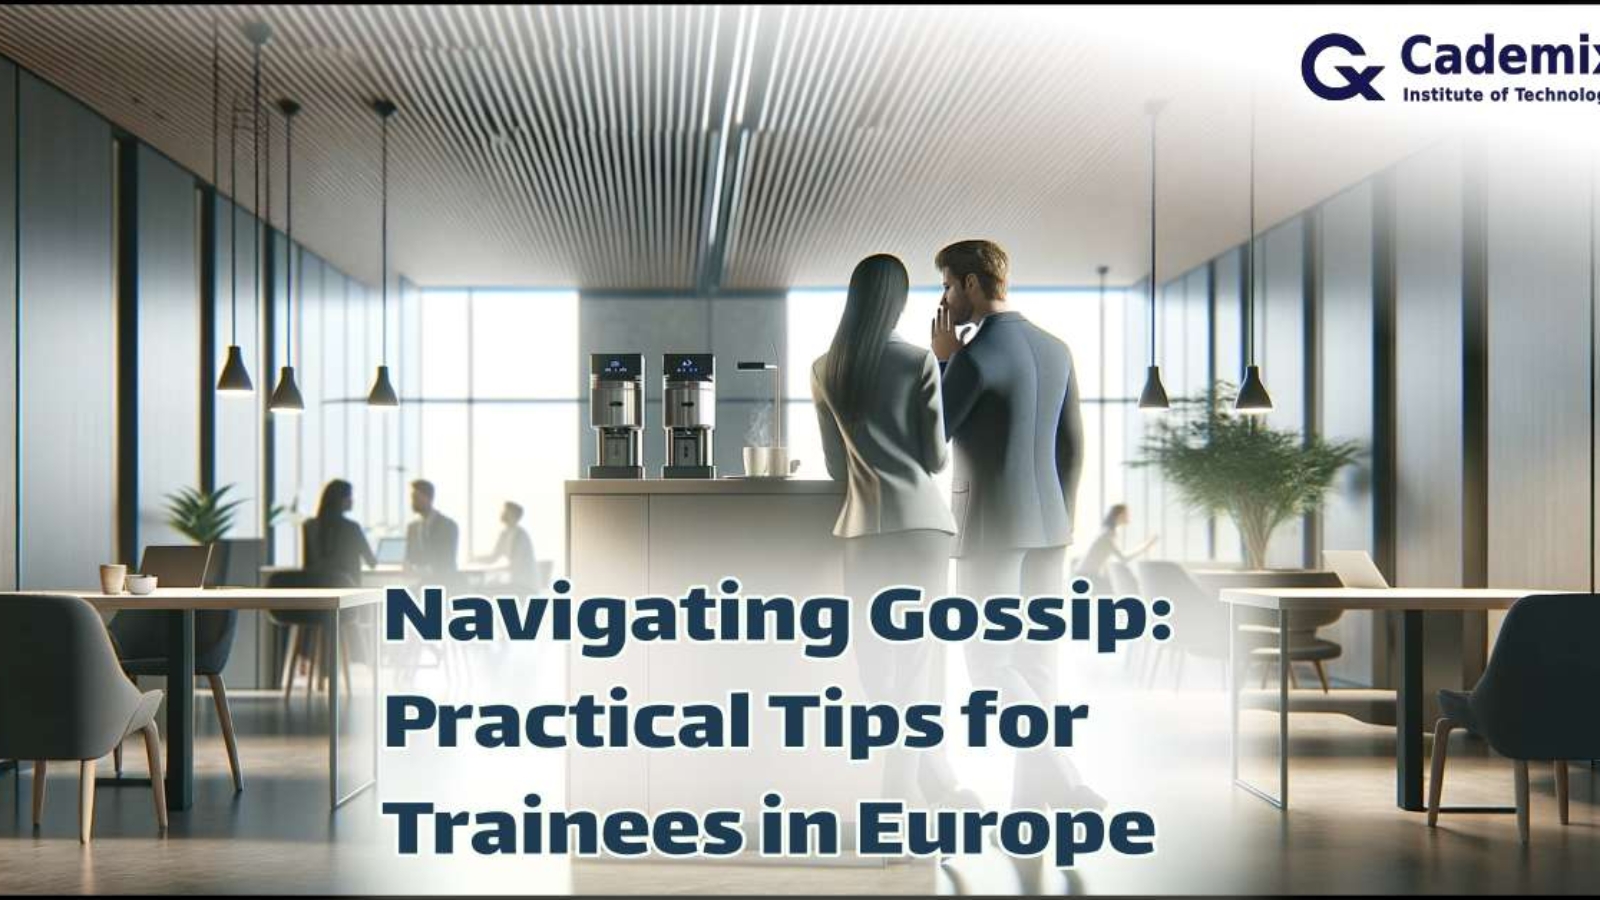 Navigating Gossip Practical Tips for Trainees in Europe